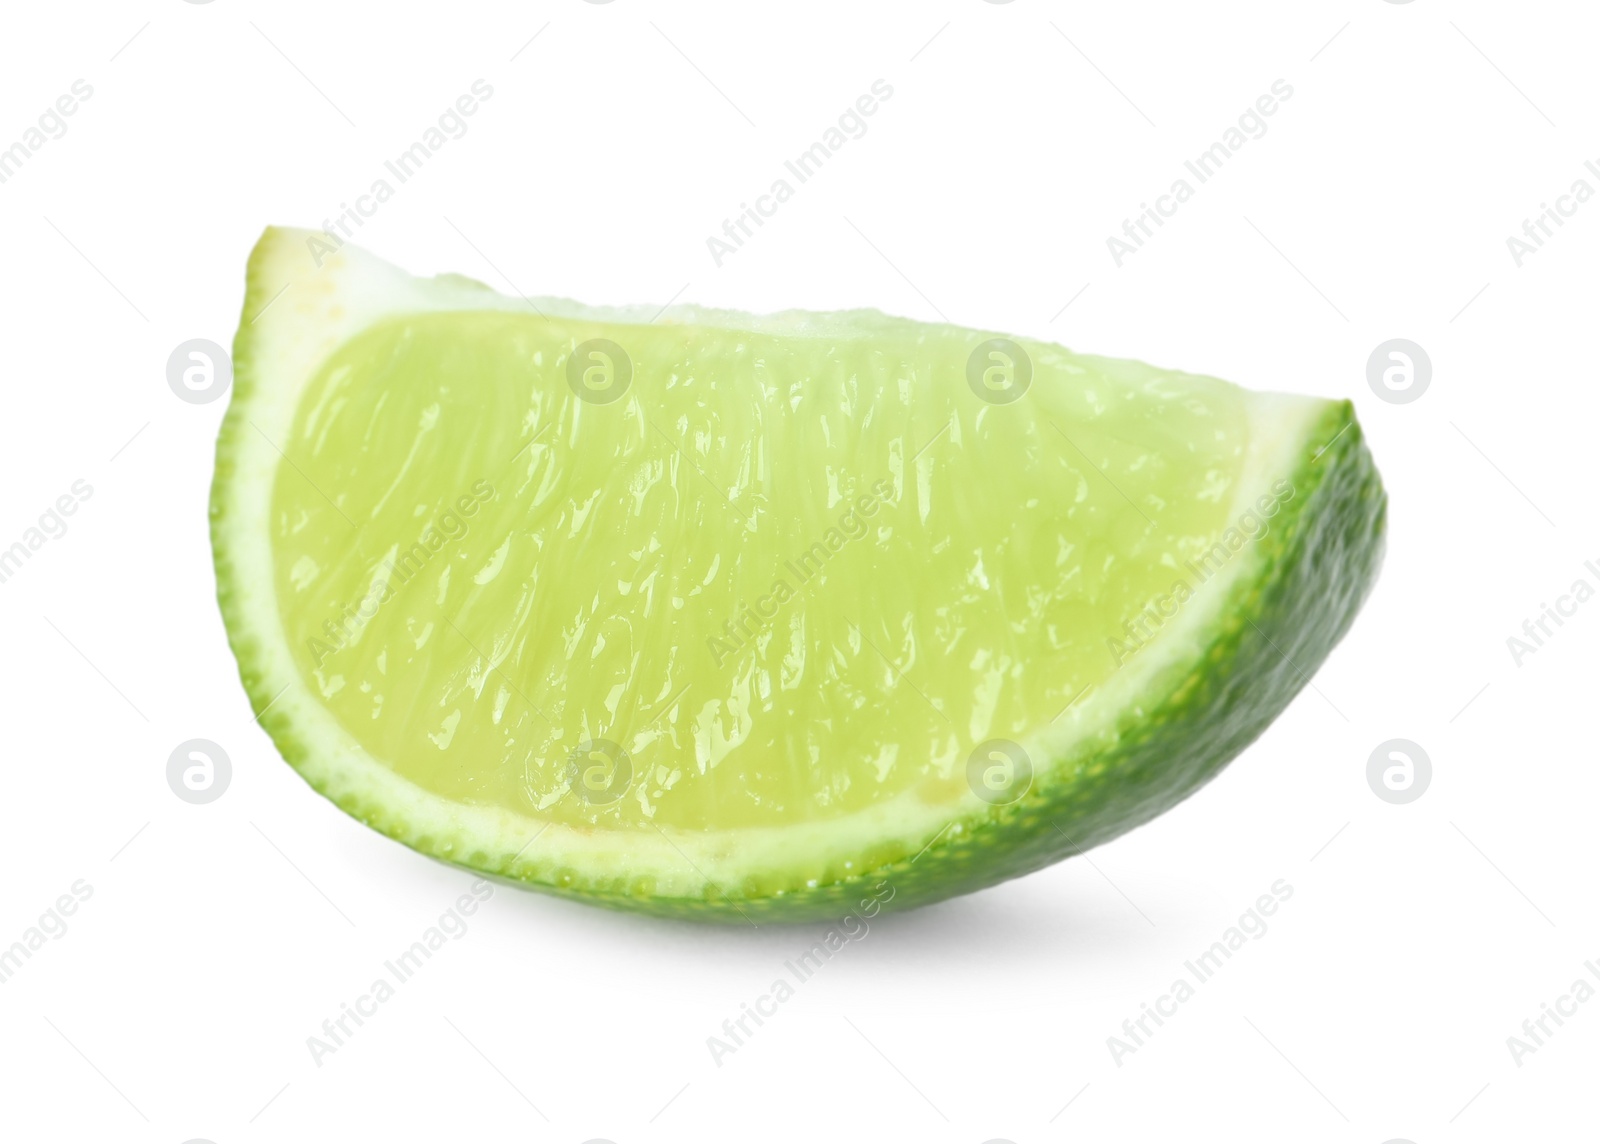 Photo of Slice of fresh green ripe lime isolated on white